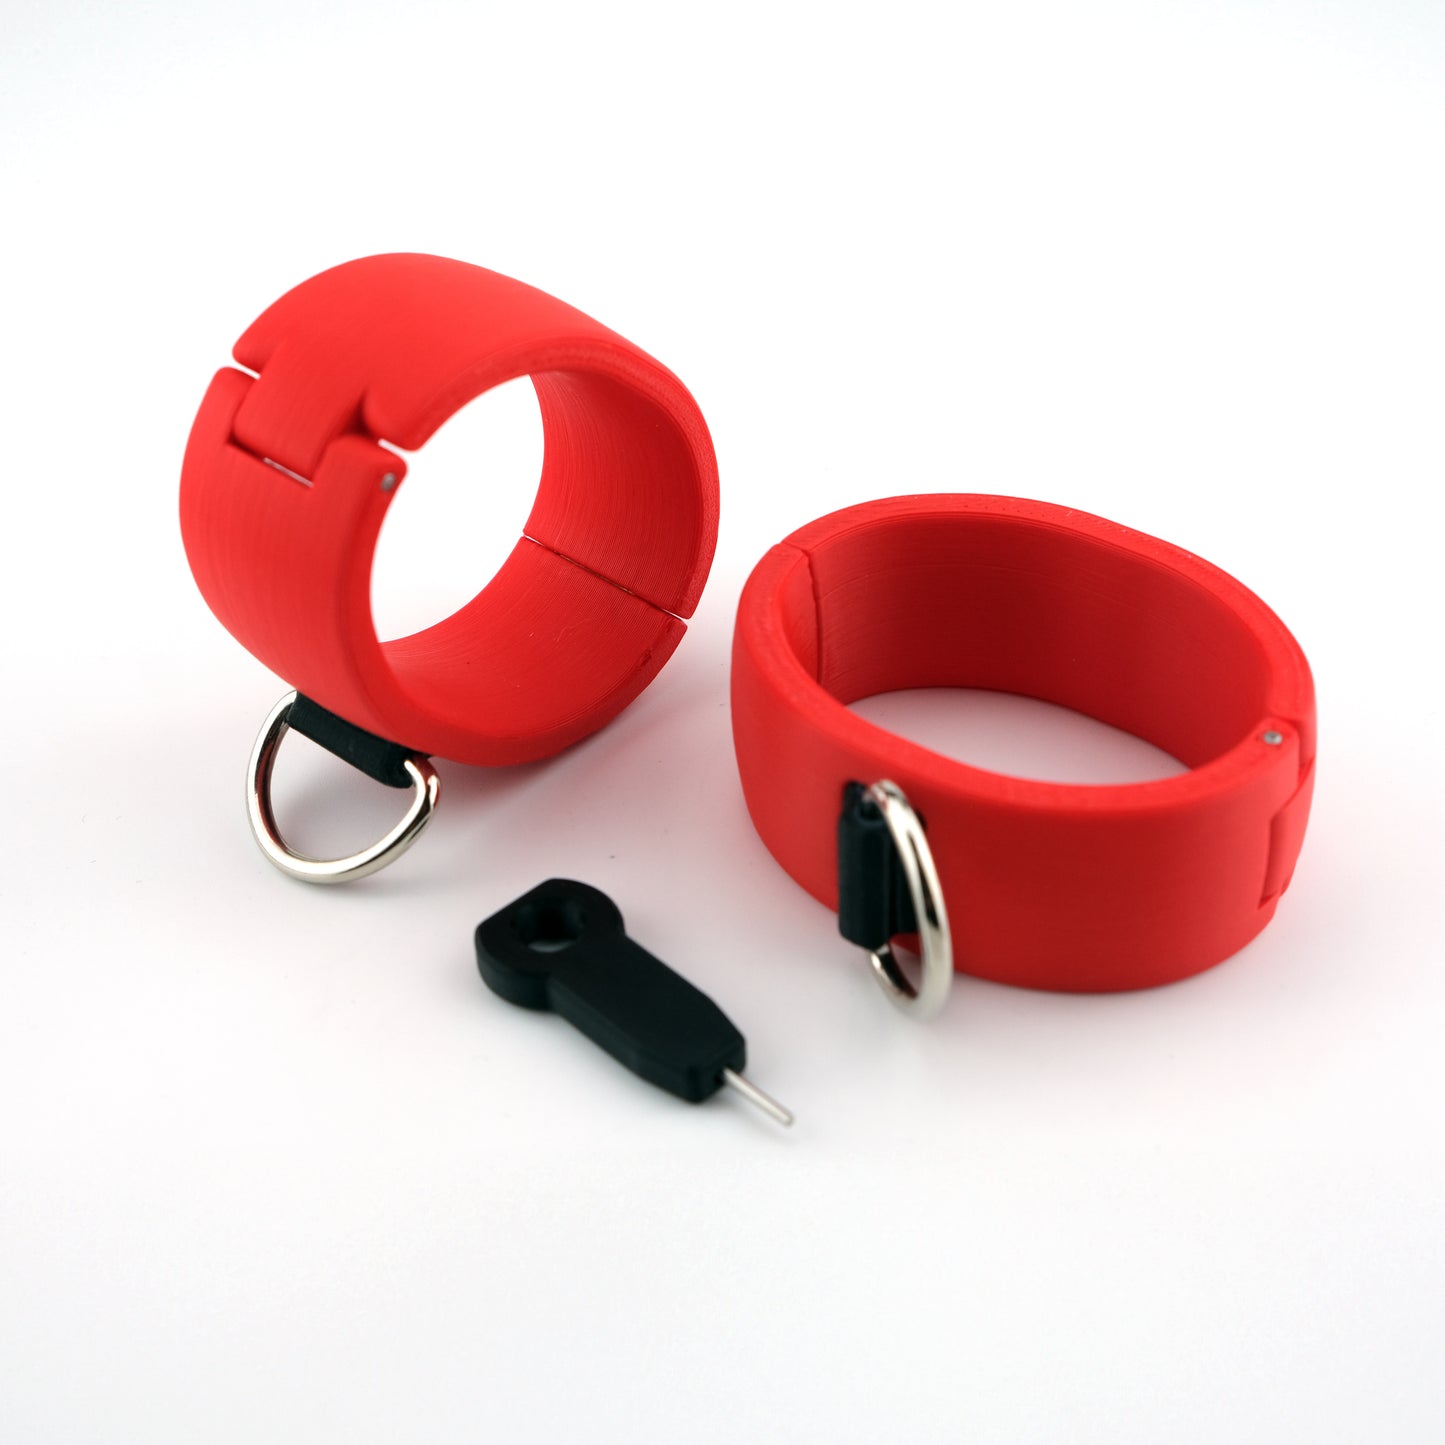 Quick-Shackles - custom made handcuffs with D-ring and click fastener